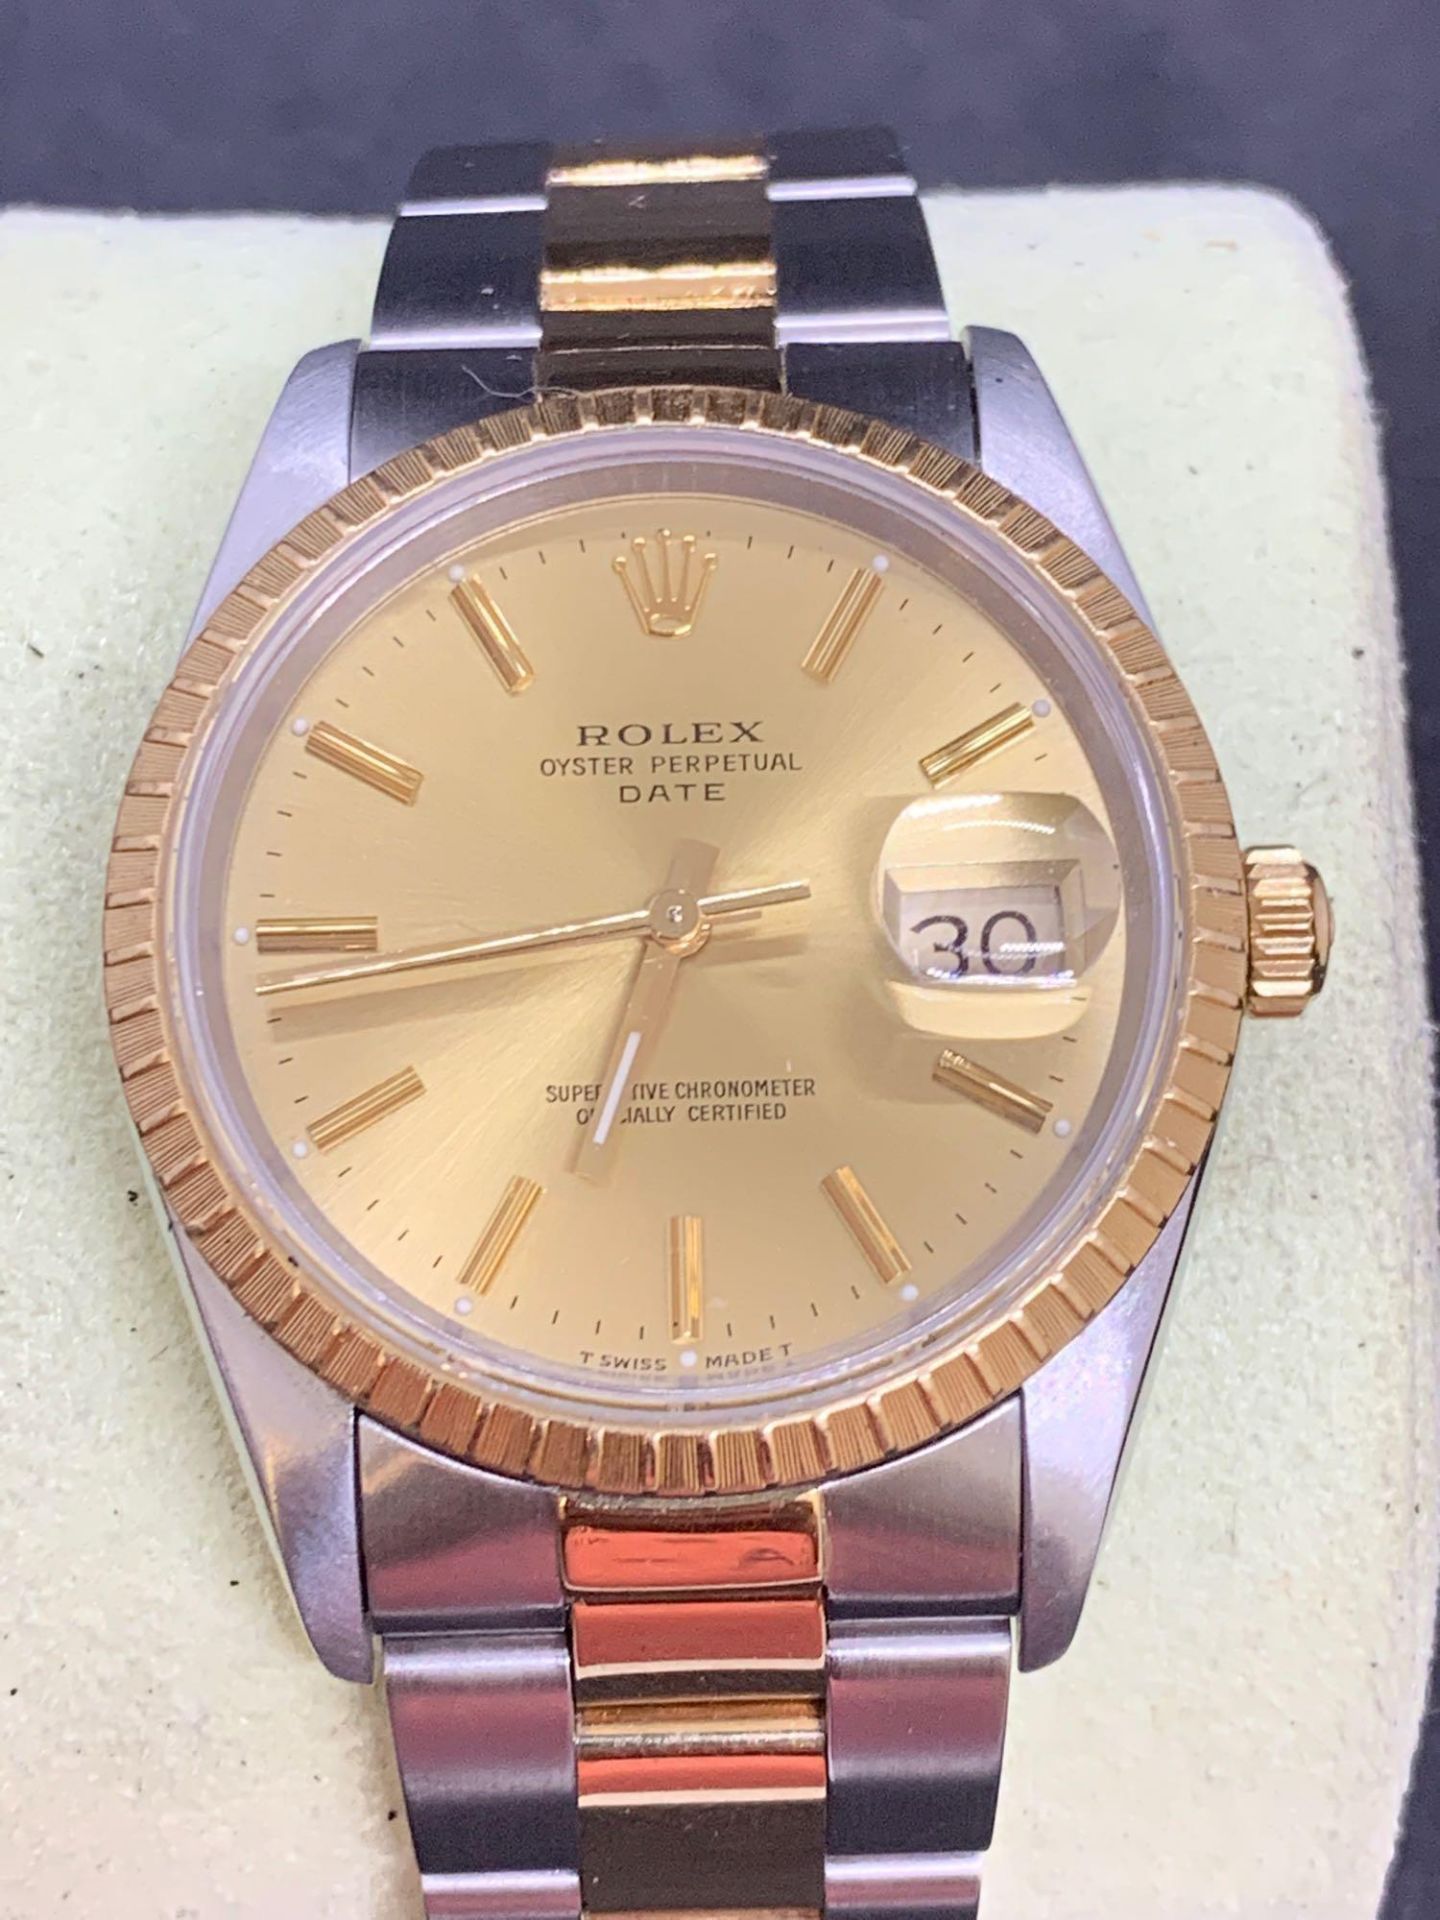 Rolex stainless steel and gold 36 mm oyster perpetual date Gents watch Oyster Bracelet - Image 7 of 7